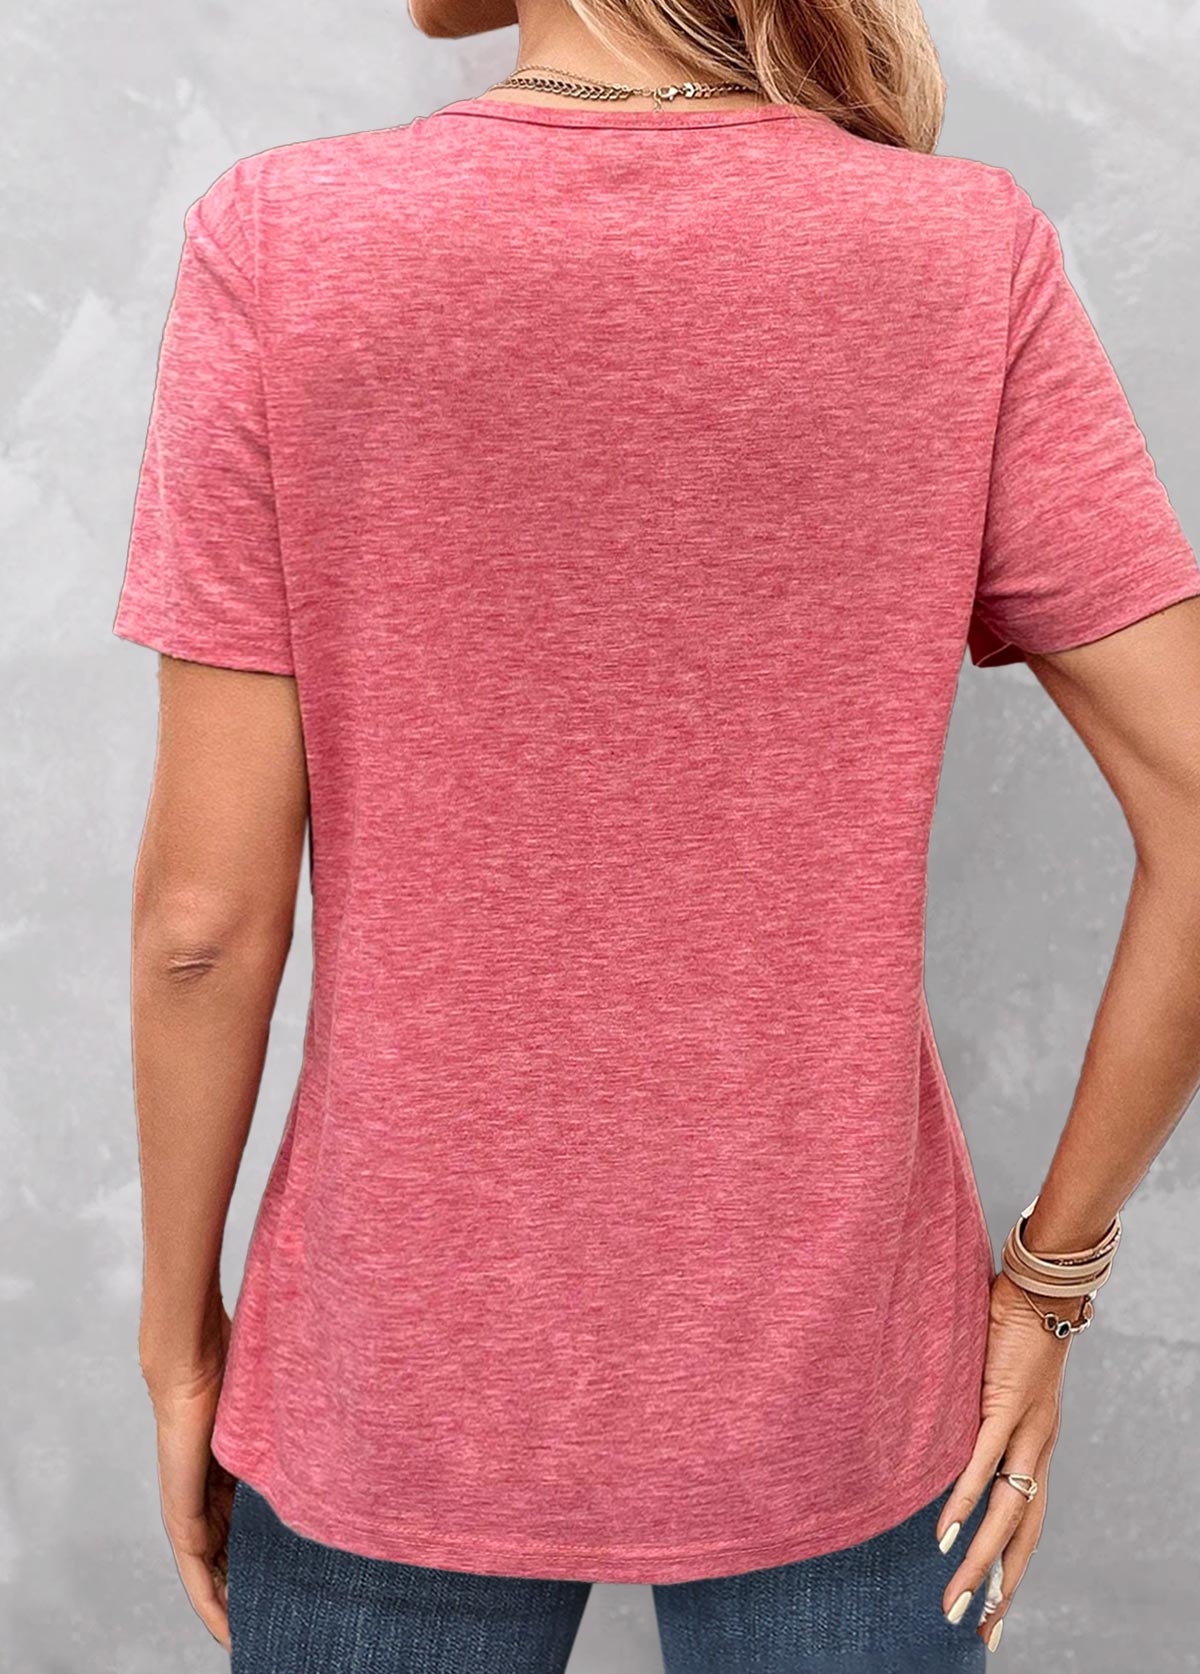 Cage Neck Lace Peach Red Short Sleeve T Shirt